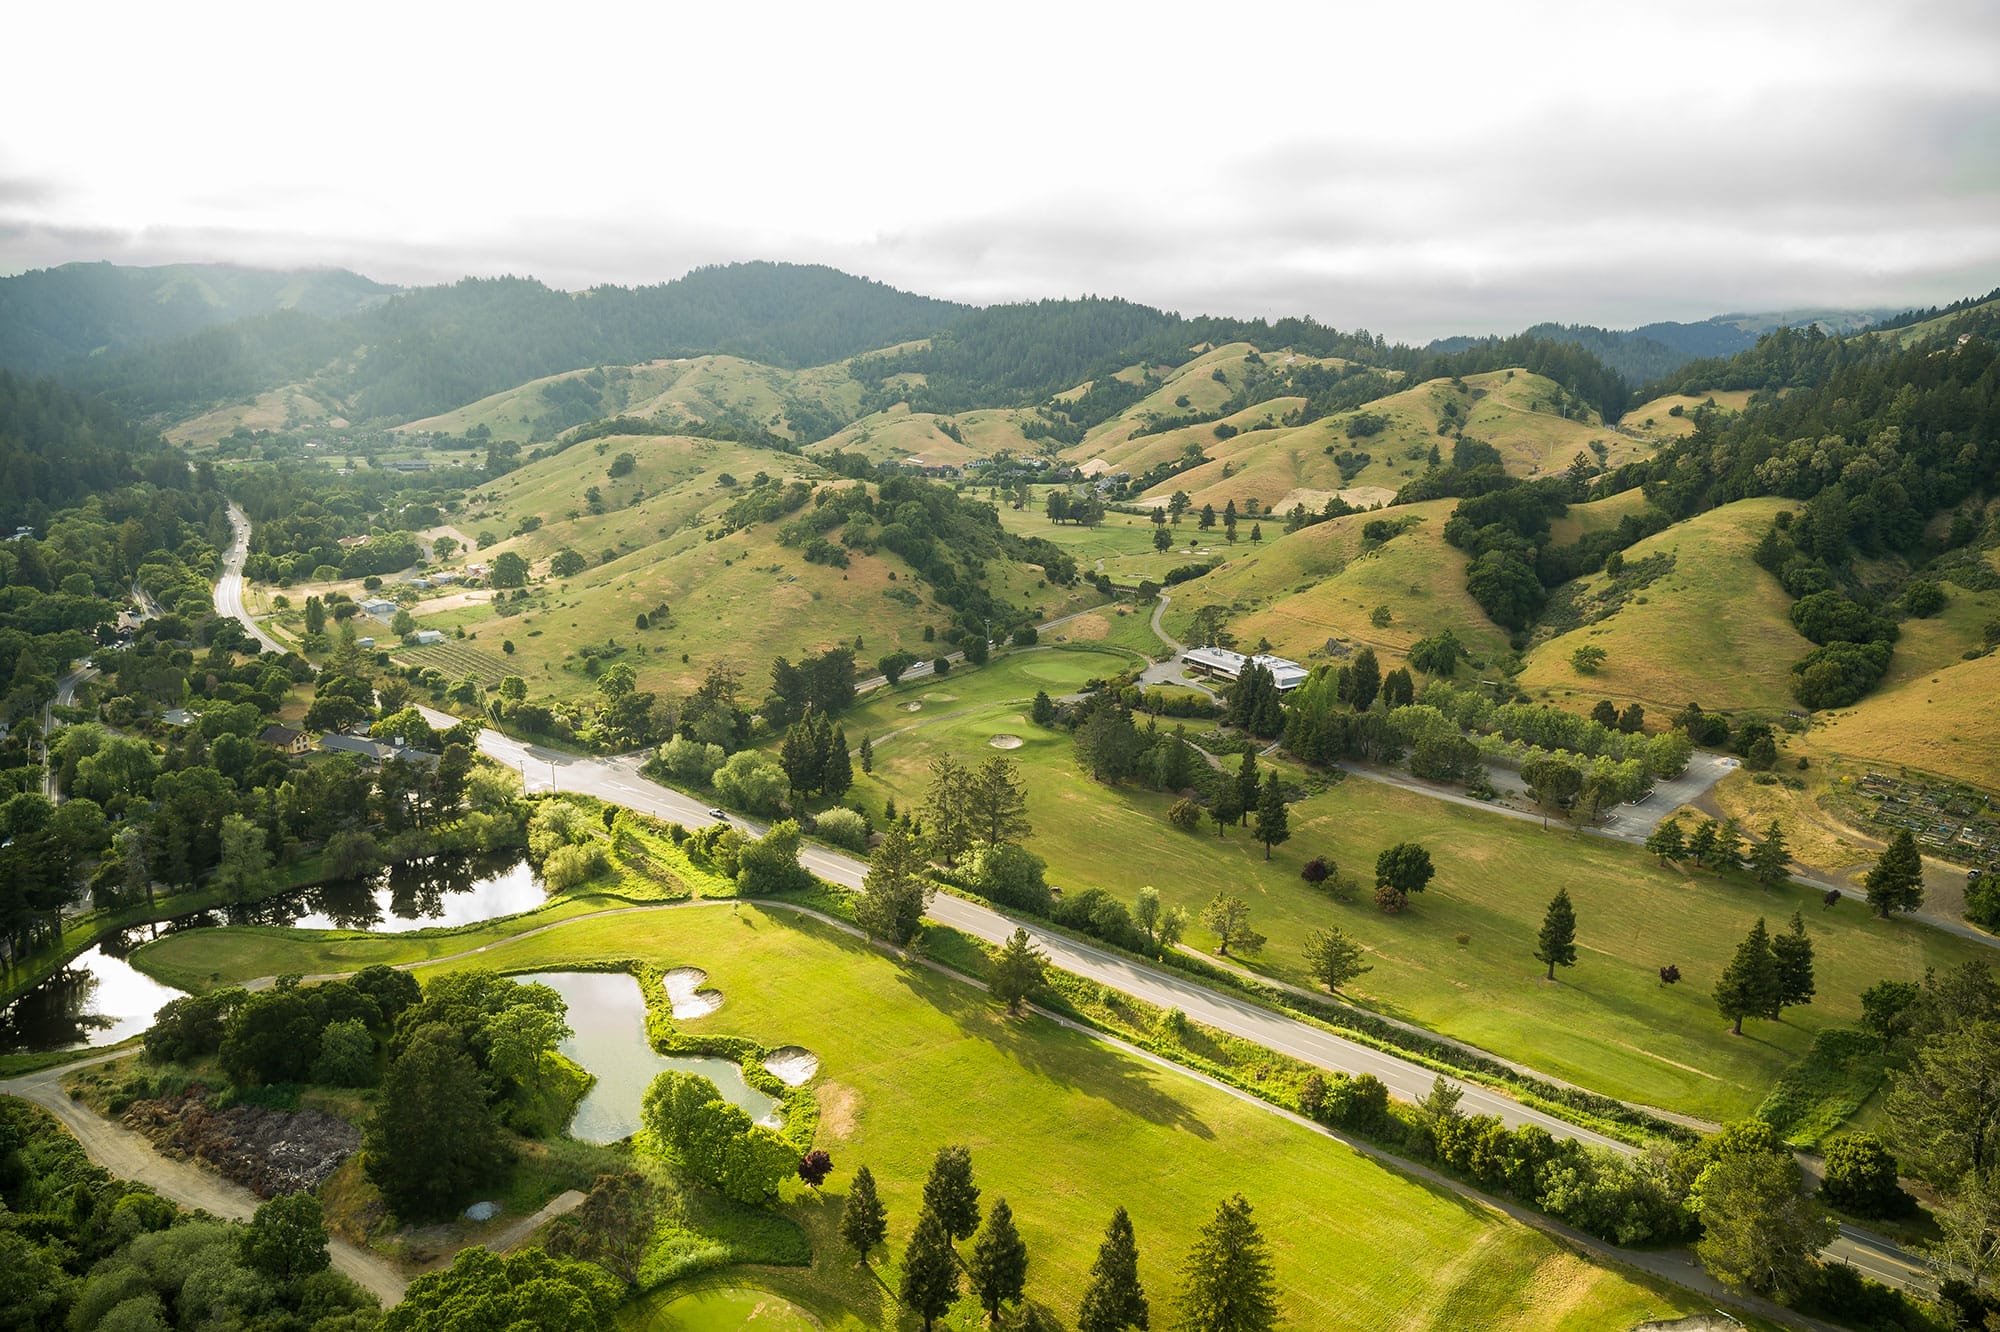 Trust for Public Land research indicates that parks departments should engage residents at every phase of park development, from design to programming. Such was the case at San Geronimo Commons, a former golf course turned community green space in California. Photo: Kevin Quach